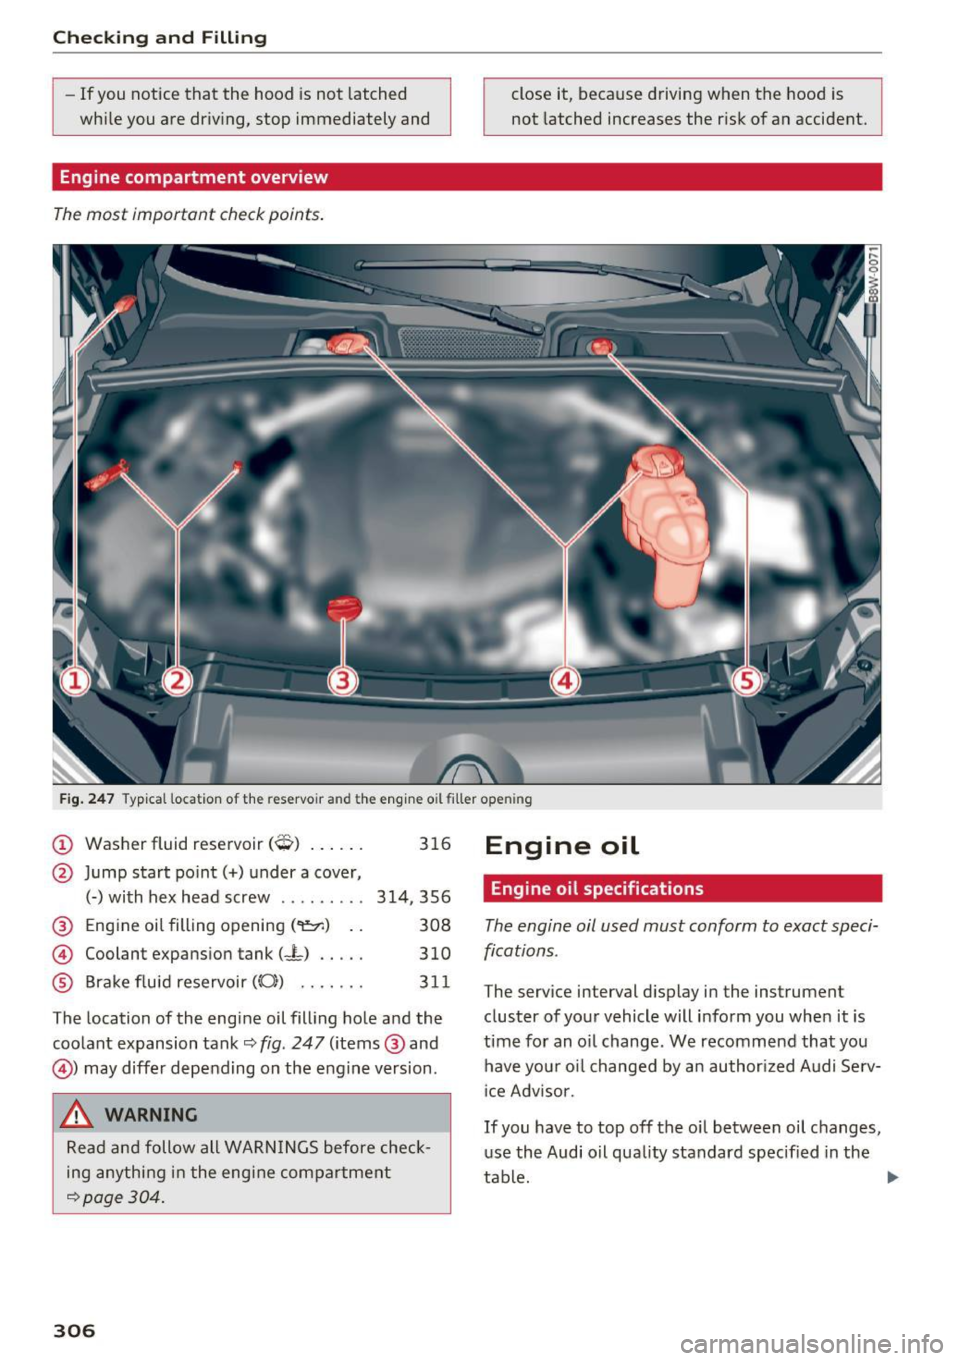 AUDI A4 2017  Owners Manual Checking  and  Filling 
-If  you  notice  that  the  hood  is not  latched 
wh ile you are dr iv ing, stop  immediately  and 
Engine compartment  overview 
The most  important  check points . 
close i